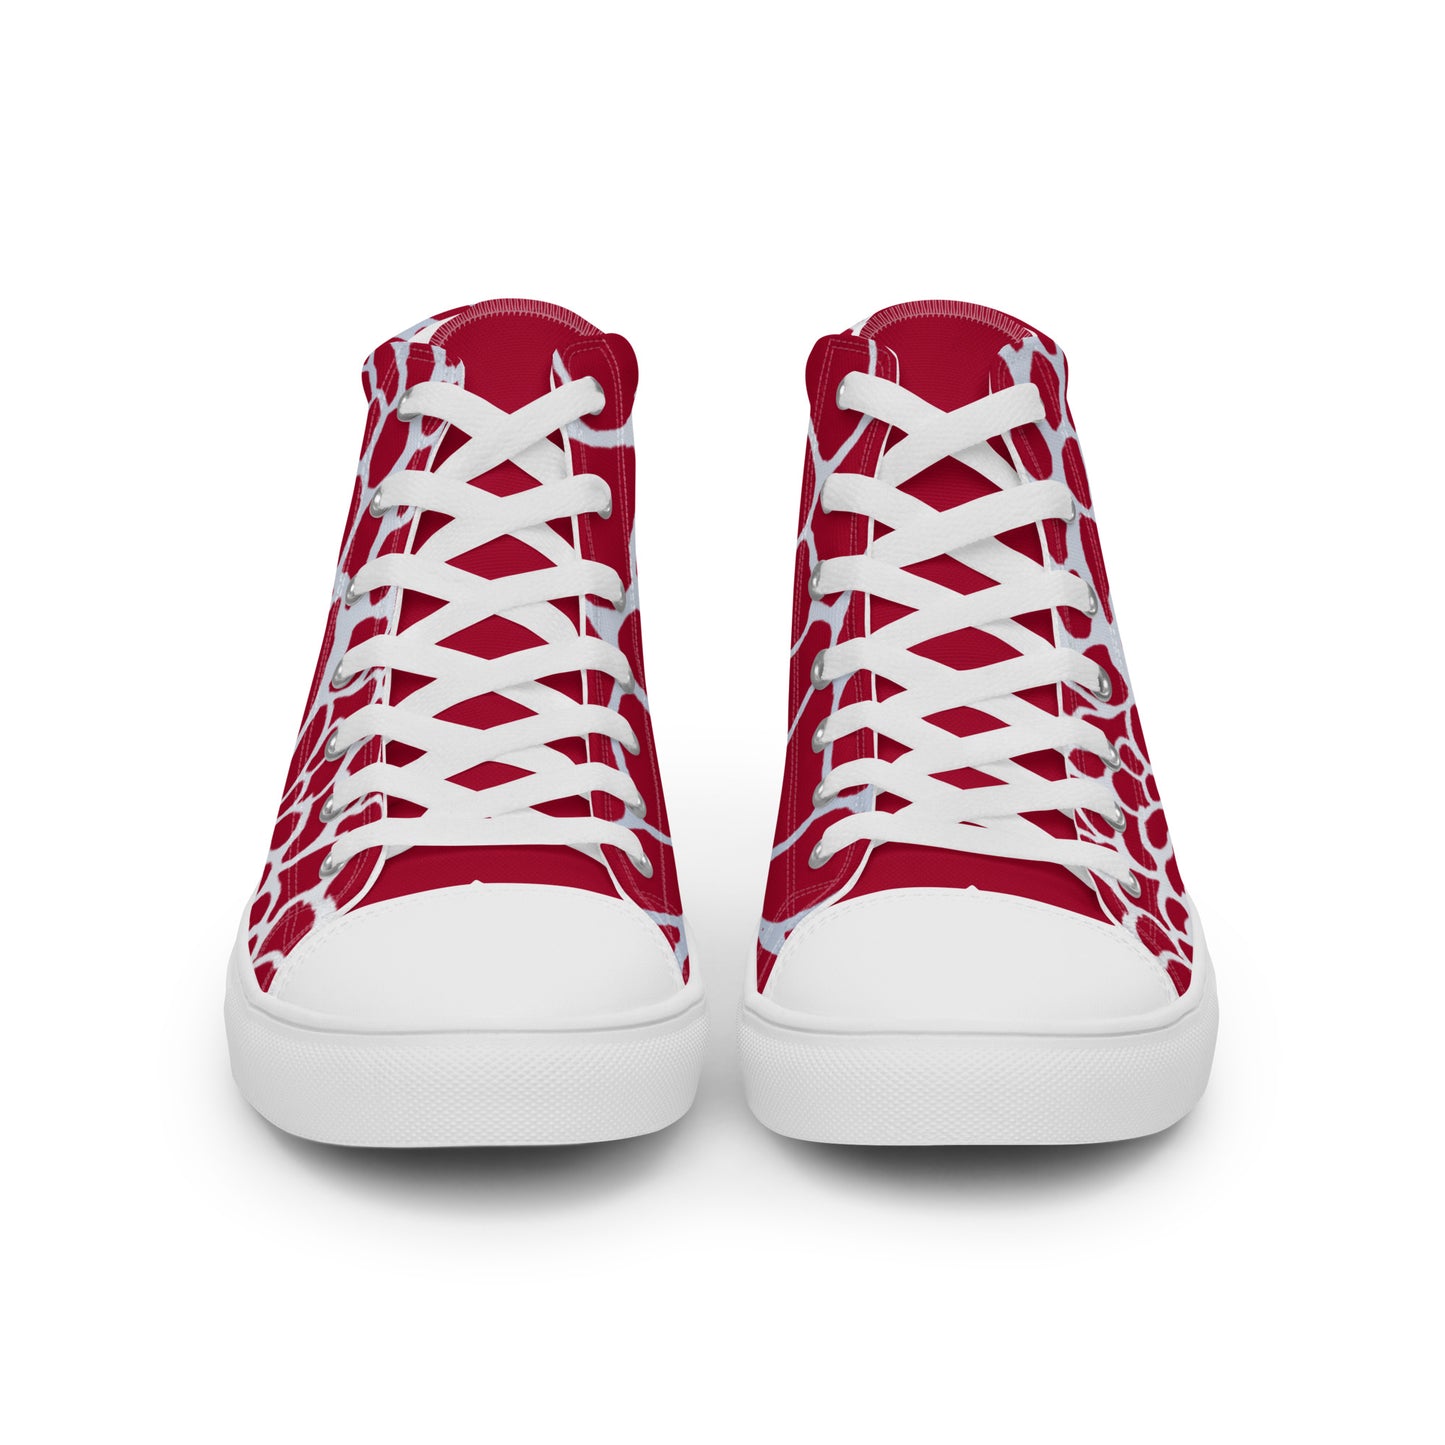 Organic Men’s High Top Canvas Shoes (Red & White) | Comfortable Print Shoes | Stylish Festival Sneakers | Comfortable Culture - Comfortable Culture - Shoes - Comfortable Culture